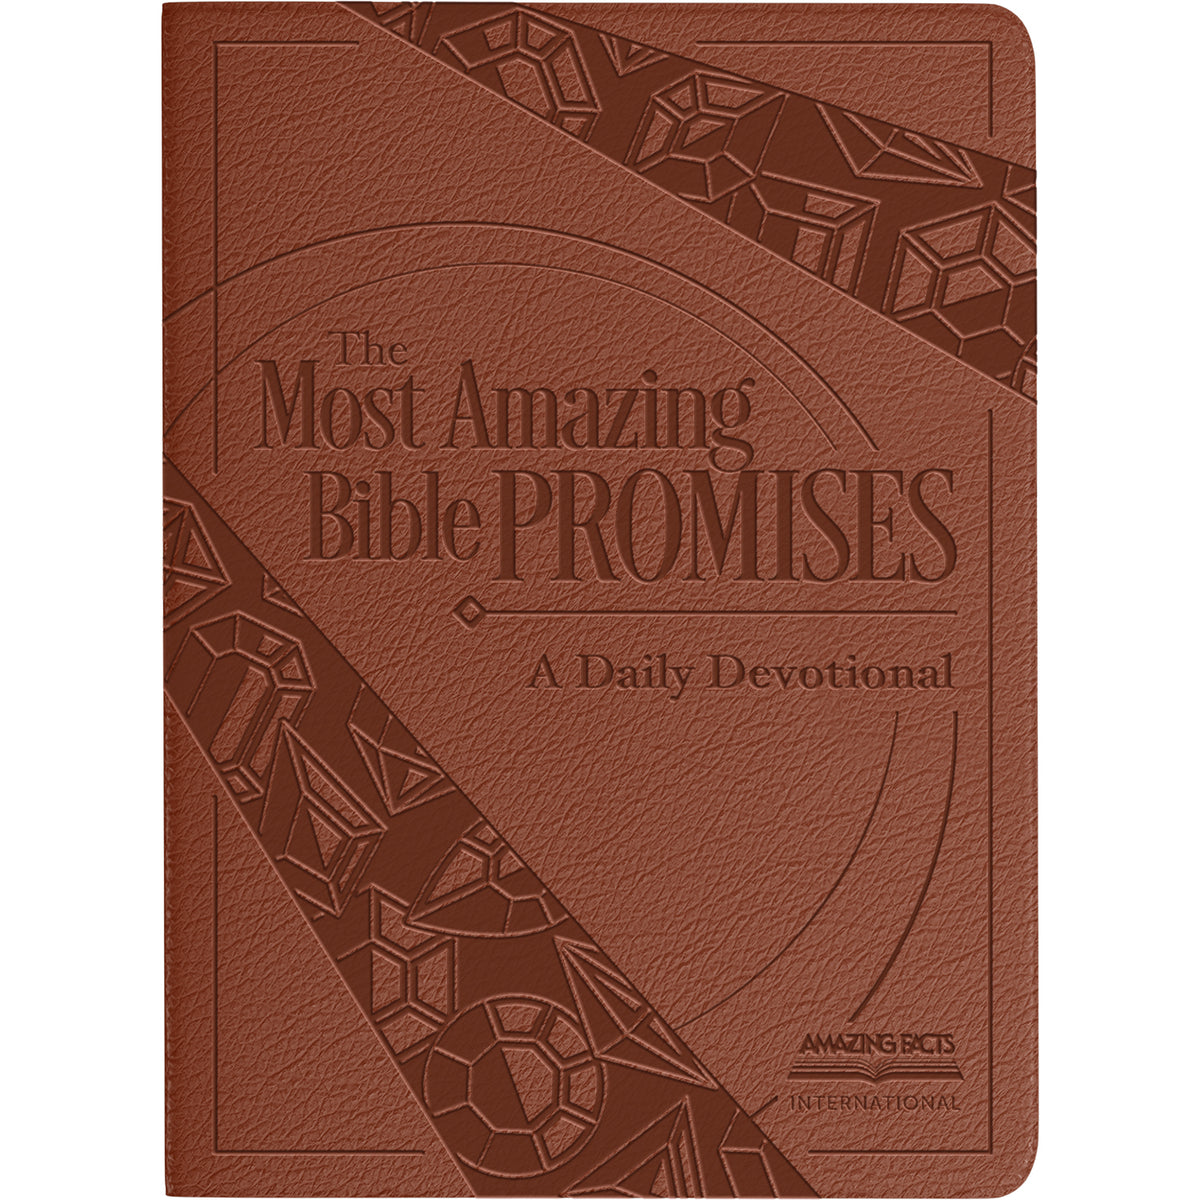 Most Amazing Bible Promises Devotional - Leathersoft by Amazing Facts